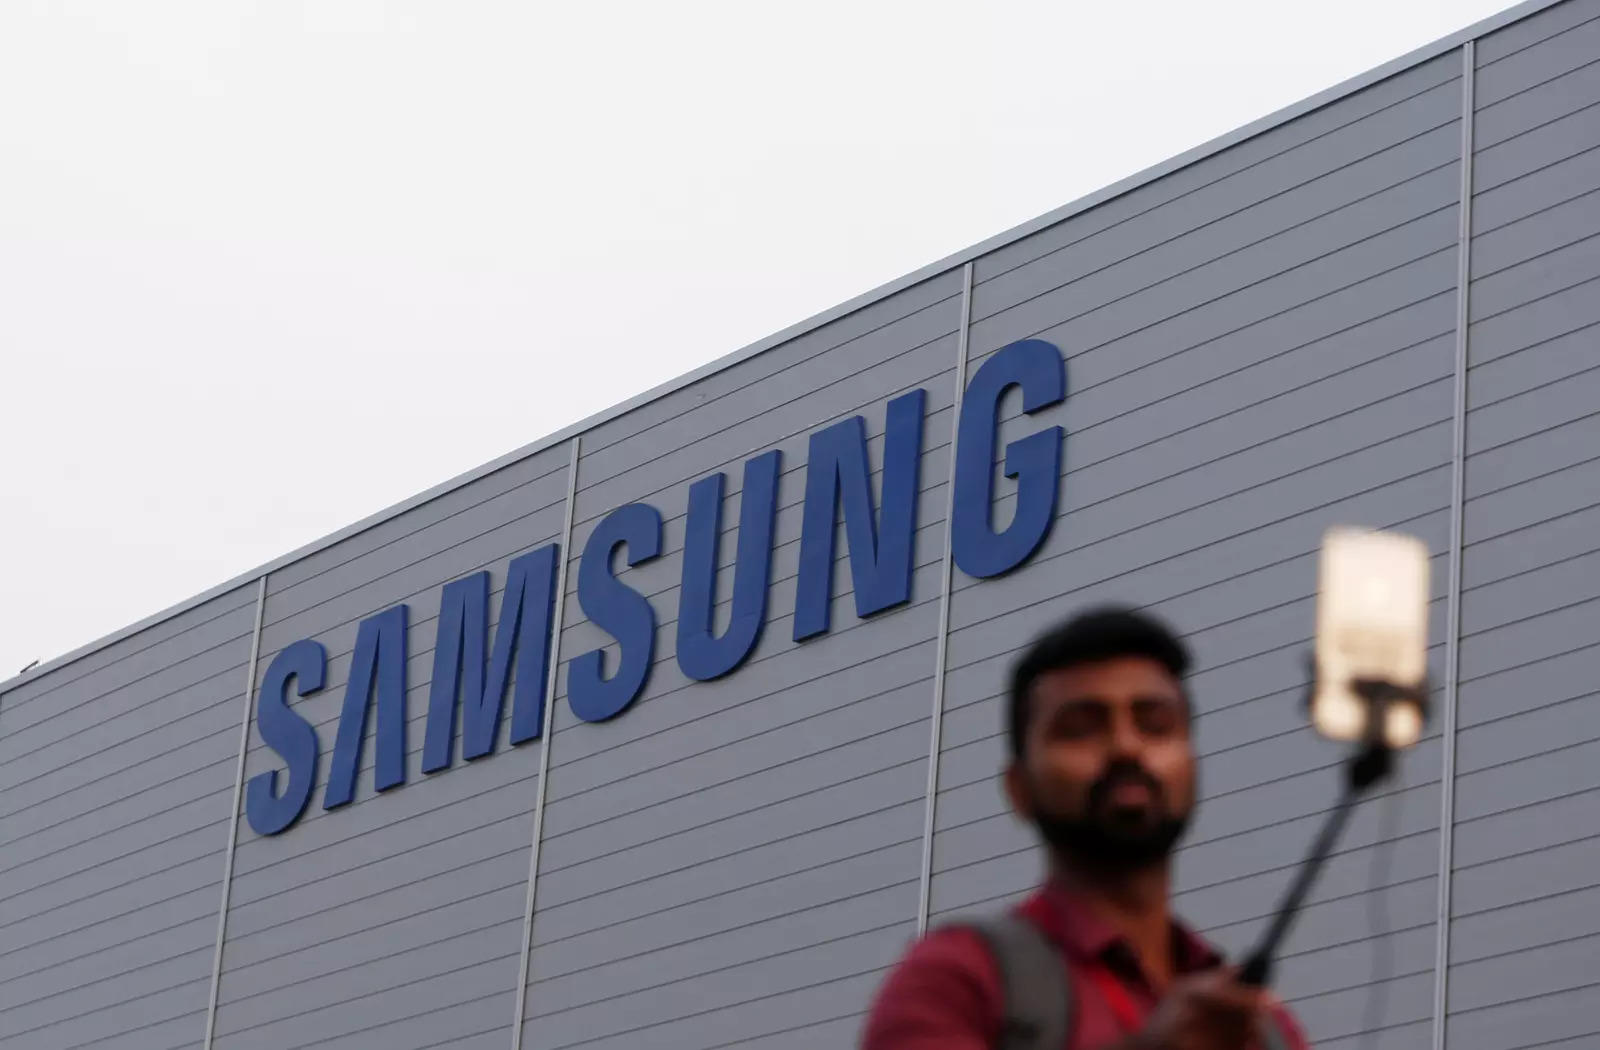  FILE PHOTO: A journalist uses a mobile phone as he works outside the Samsung Electronics smartphone manufacturing facility in Noida, India, July 9, 2018. REUTERS/Adnan Abidi